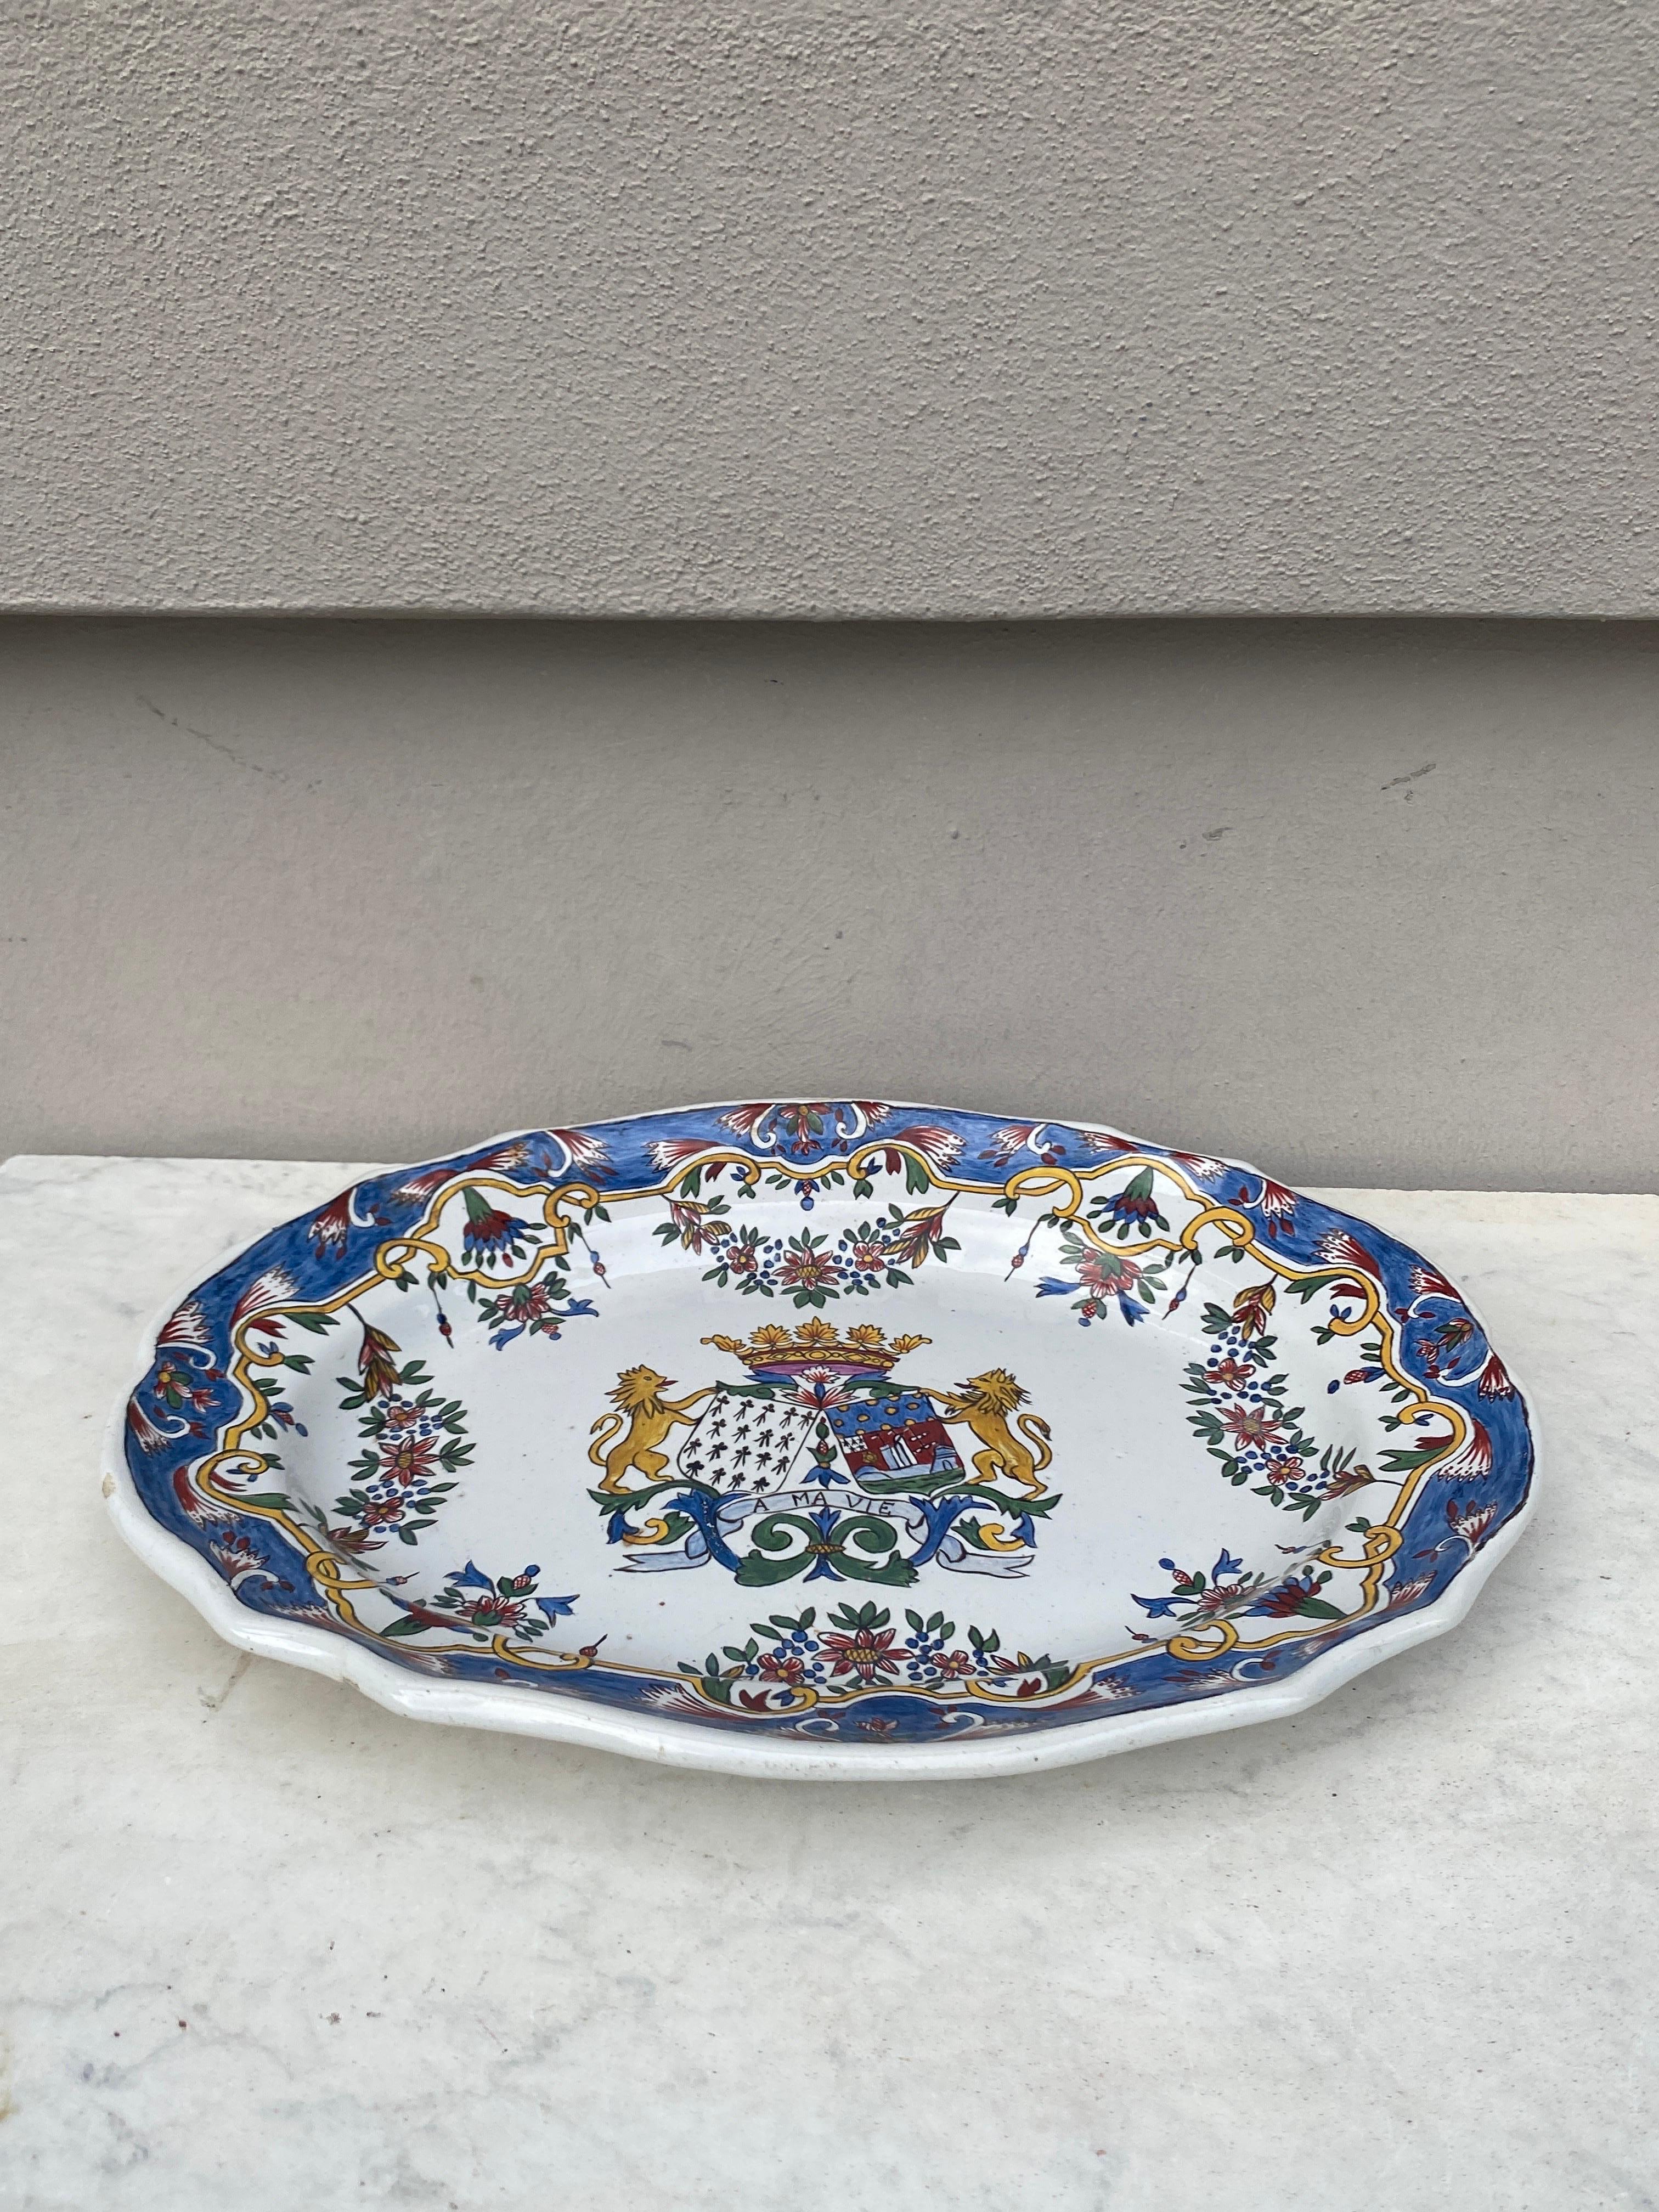 Large French Faience Platter Circa 1950.